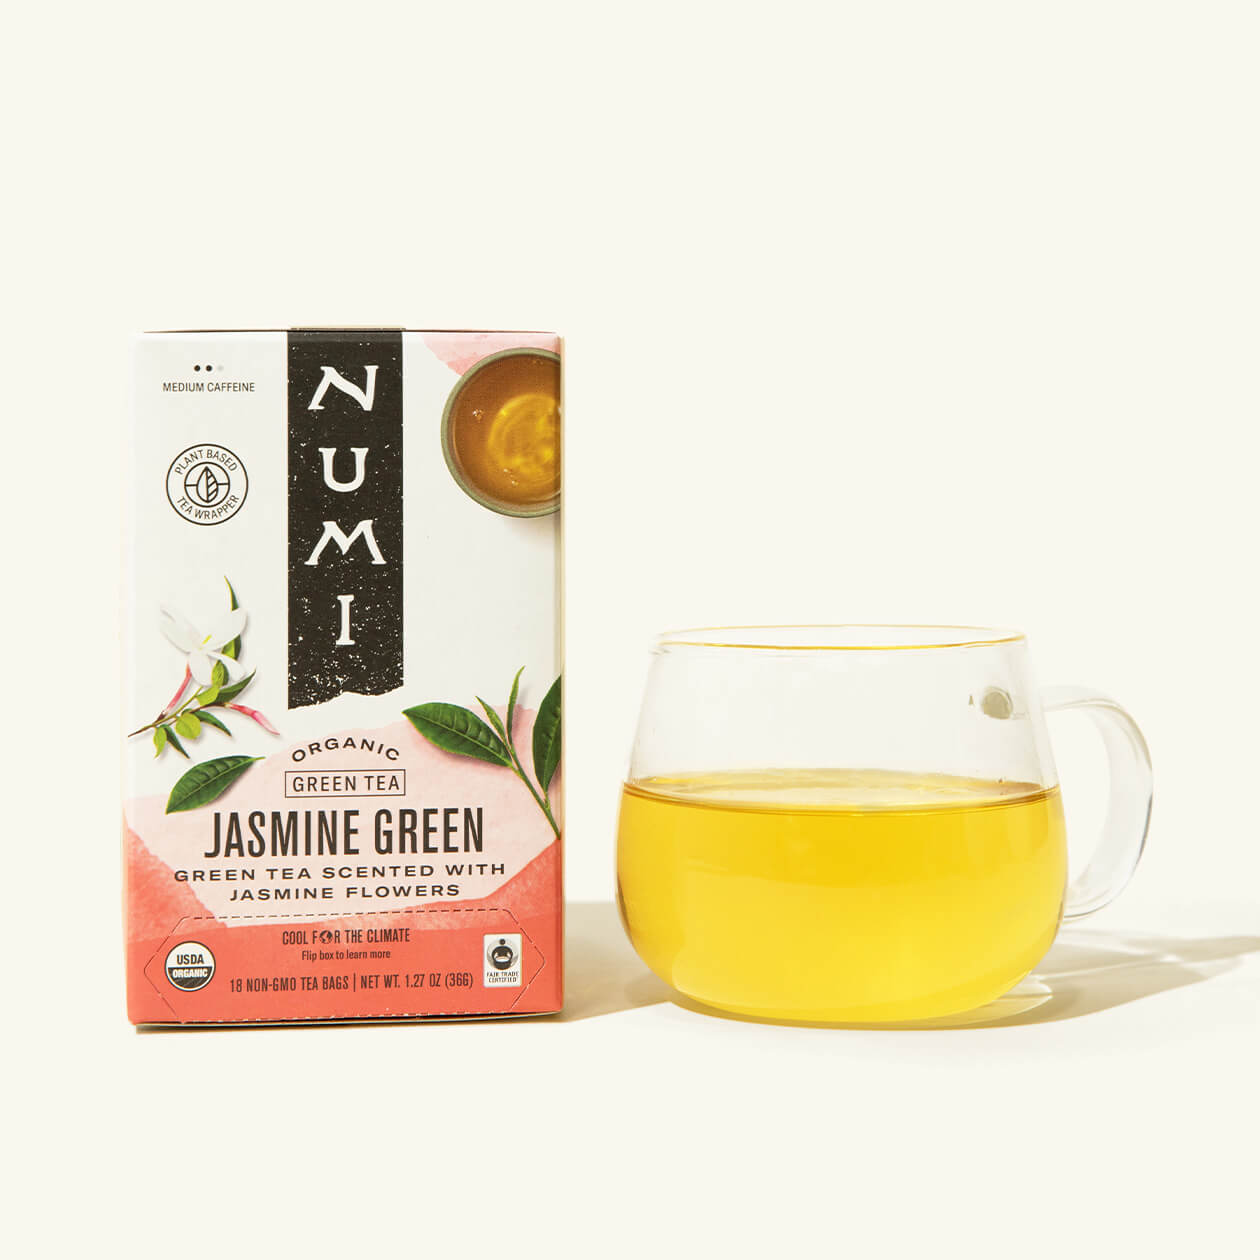 A box of Numi's Jasmine Green next to a brewed cup of tea in a clear cup